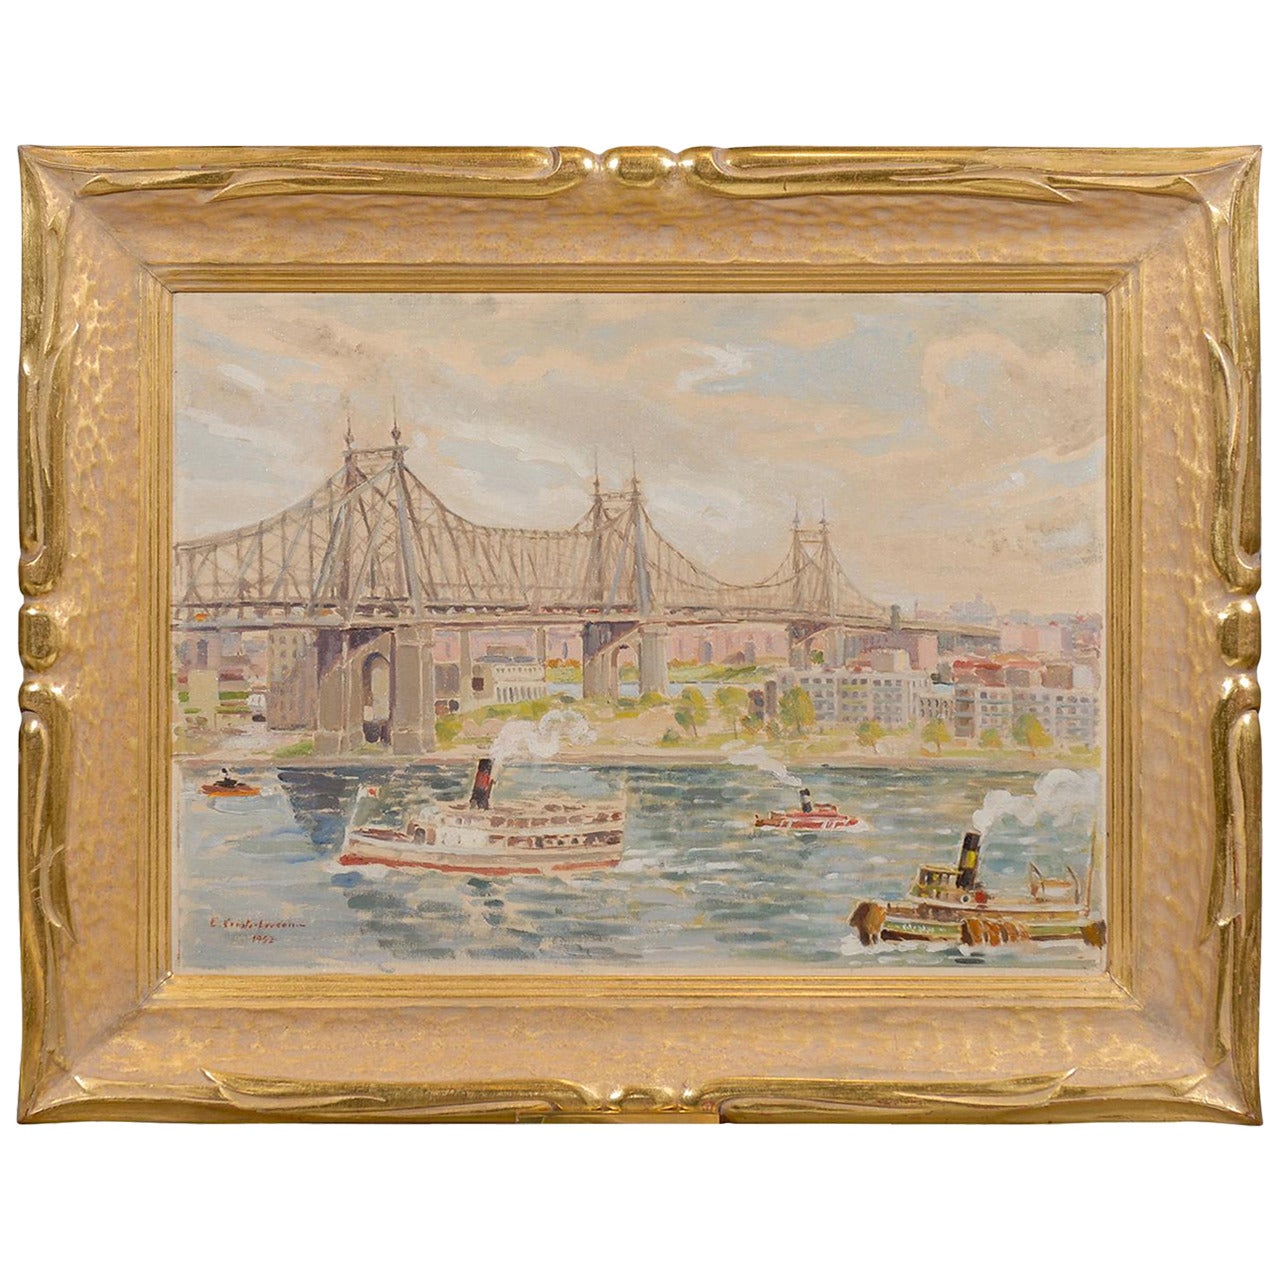 Beautifully Framed Oil on Canvas of the Queensboro Bridge